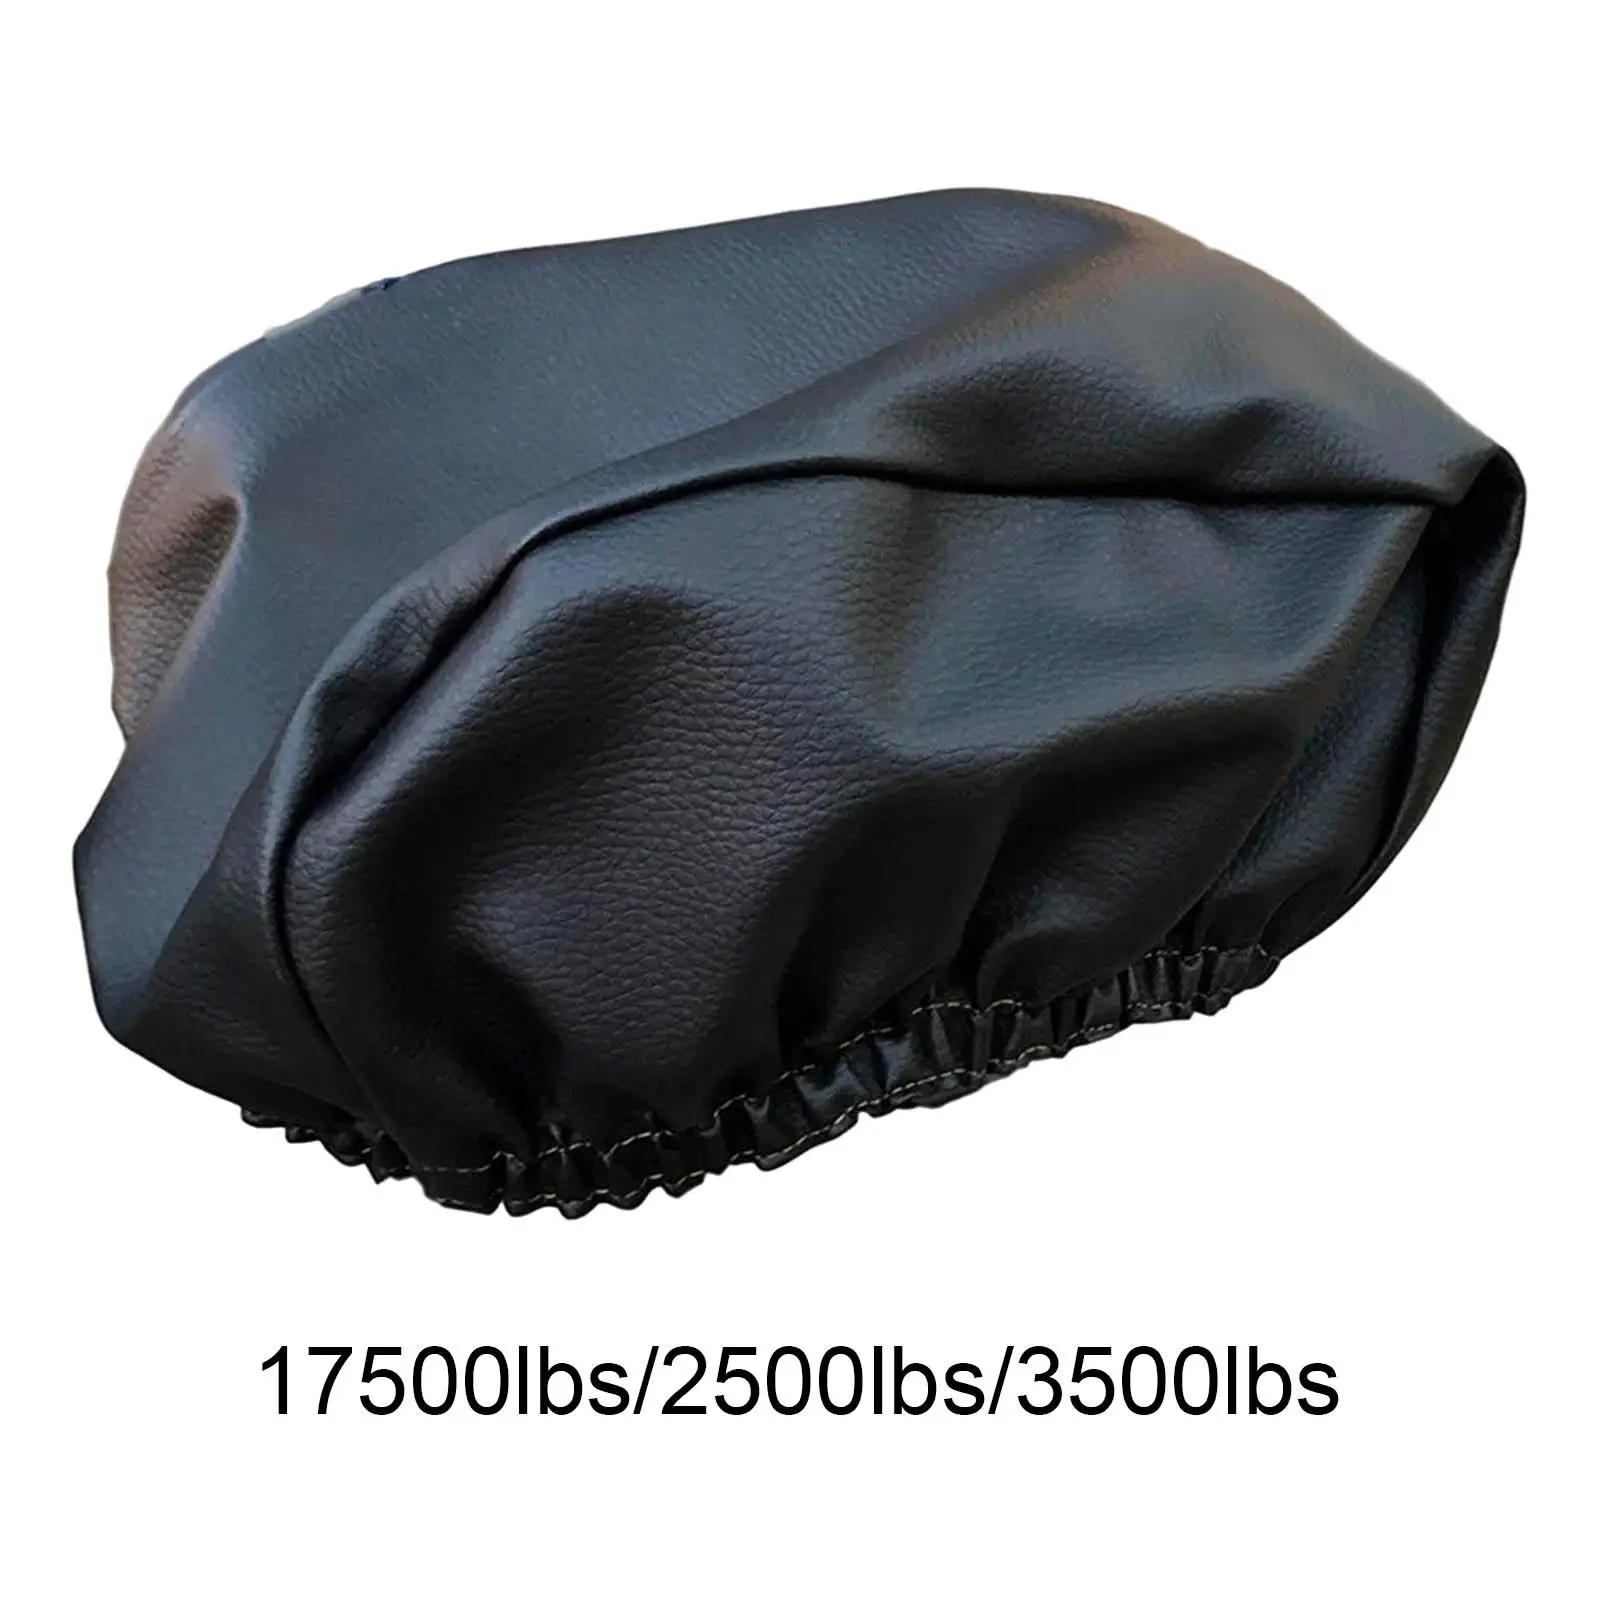 Black Winch Cover Simple Installation Accs Protector Durable Heavy Duty Waterproof Keep Clean Stain Resistant Dust Cover